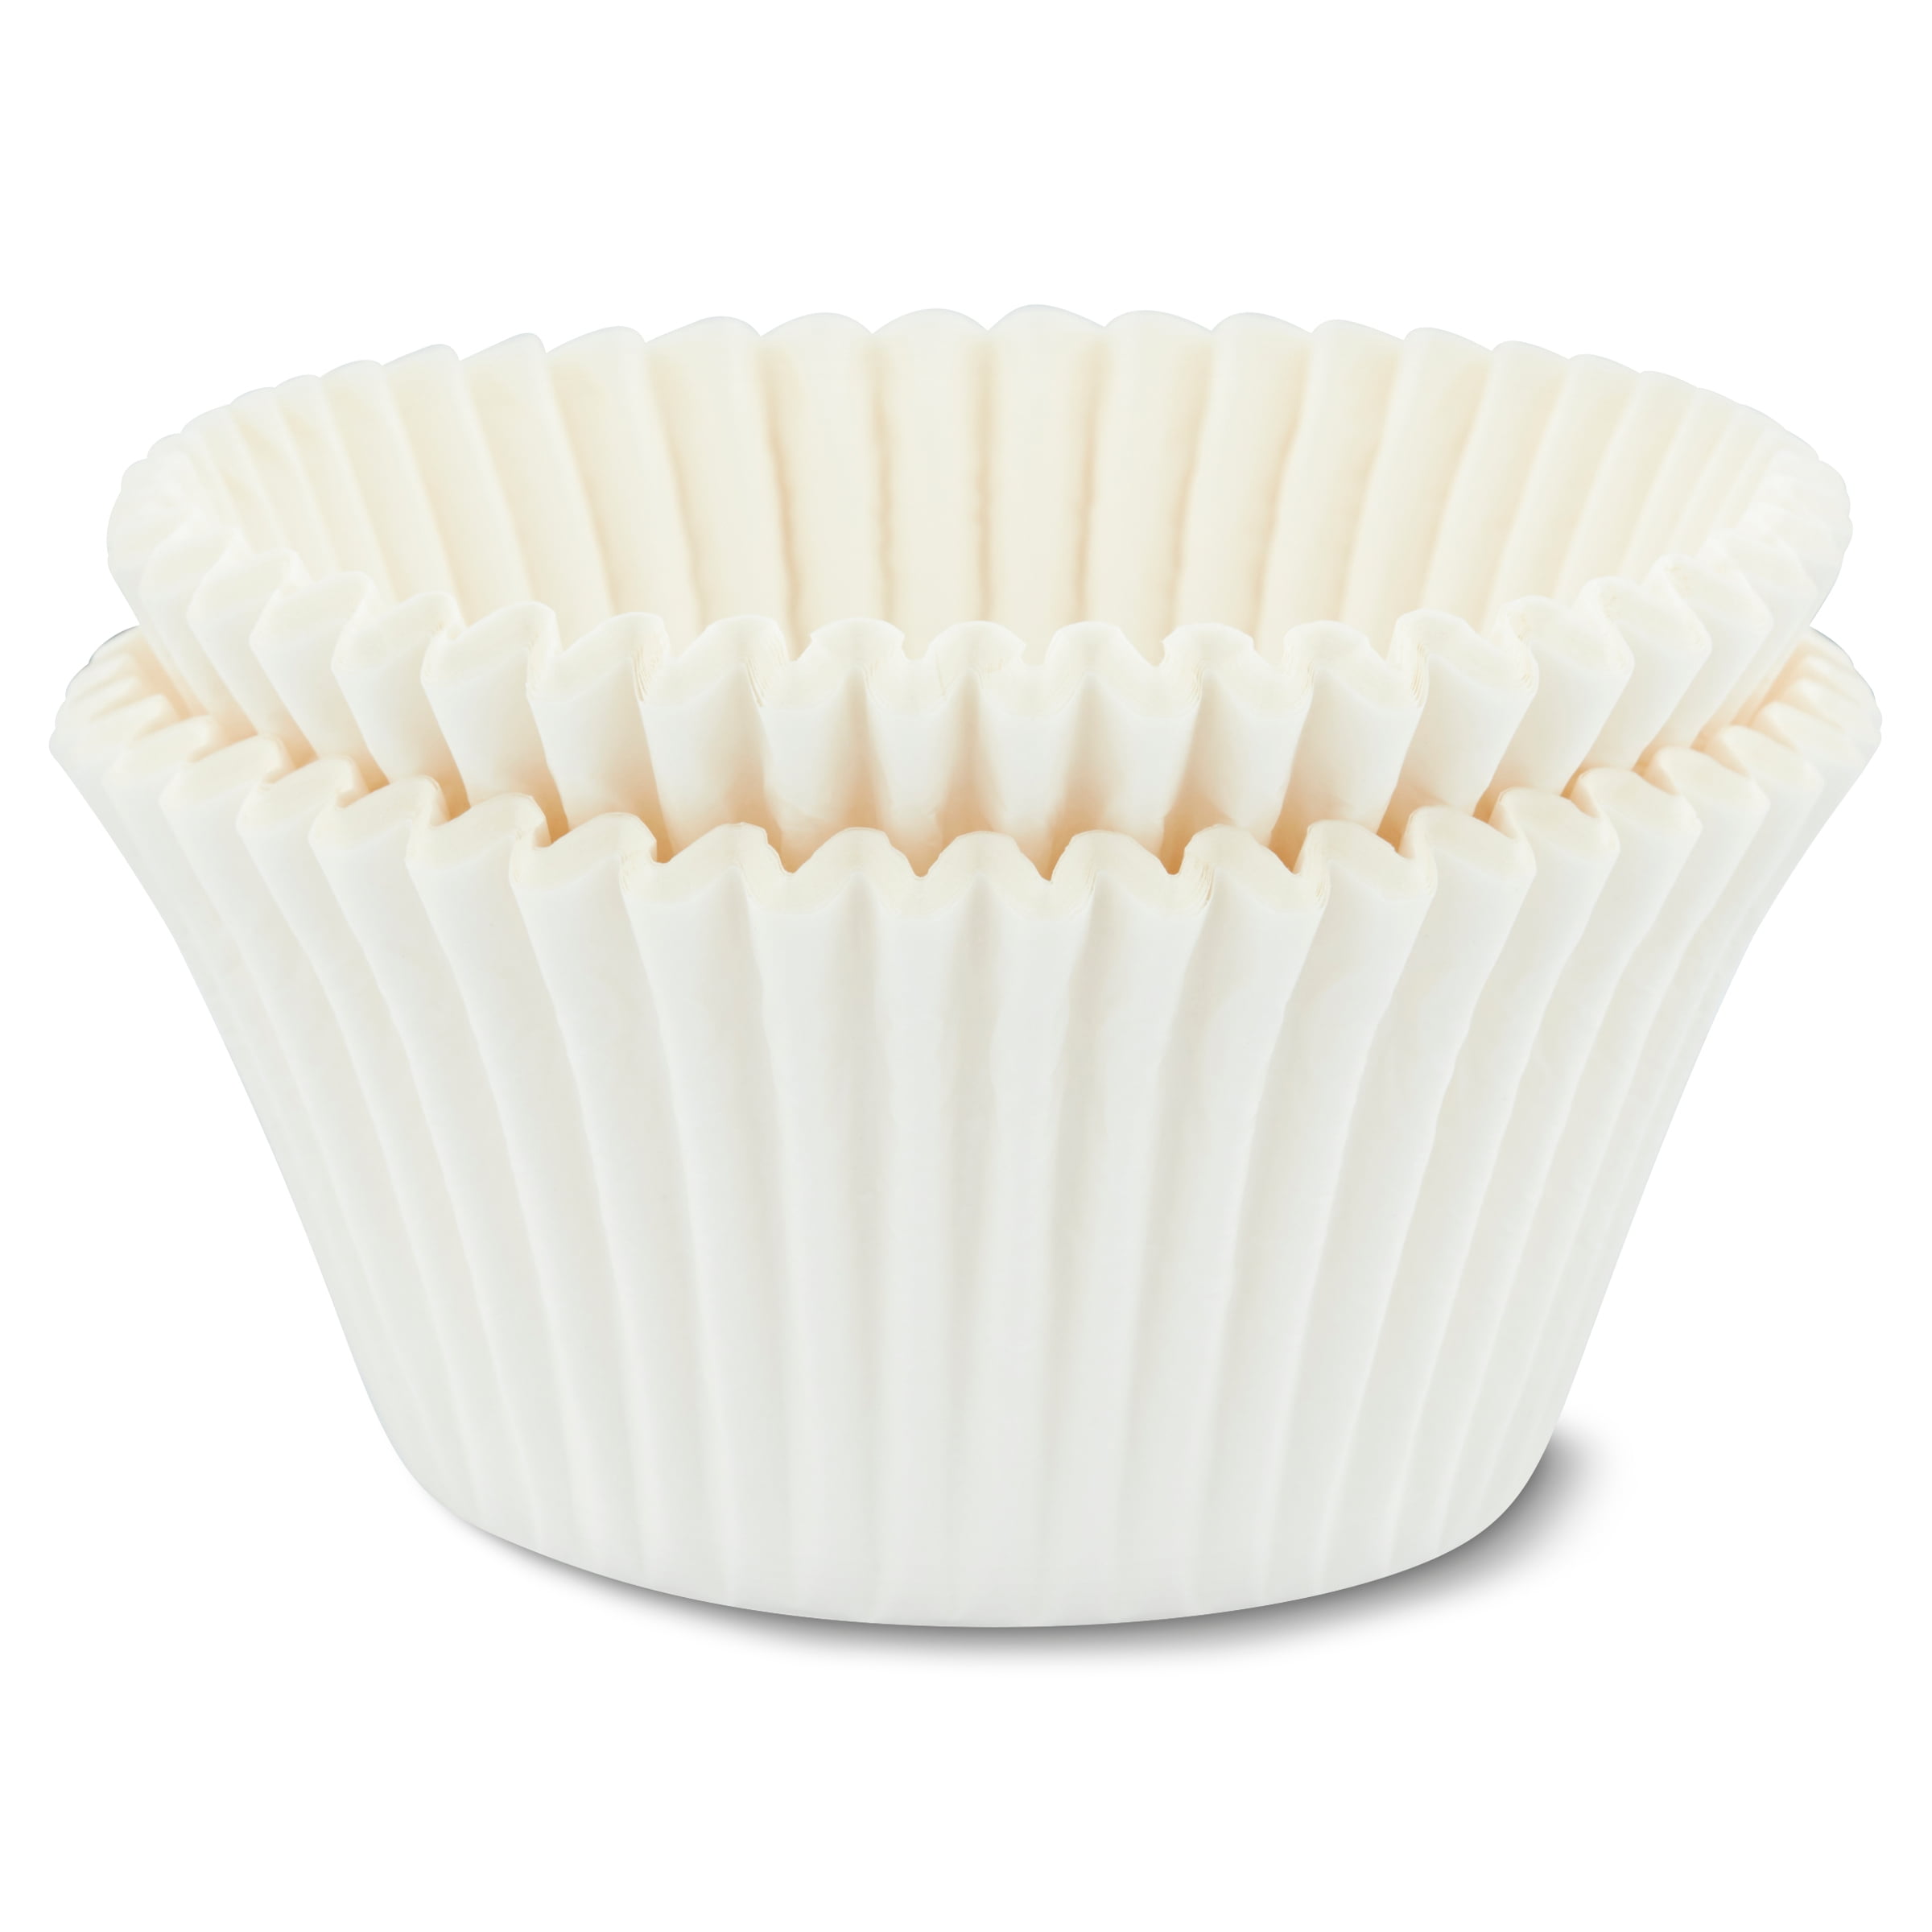 500 Jumbo Cupcake Muffin Liners 2 1/4 x 1 7/8 | Large Tall White Fluted Baking Cups Cupcake Liners